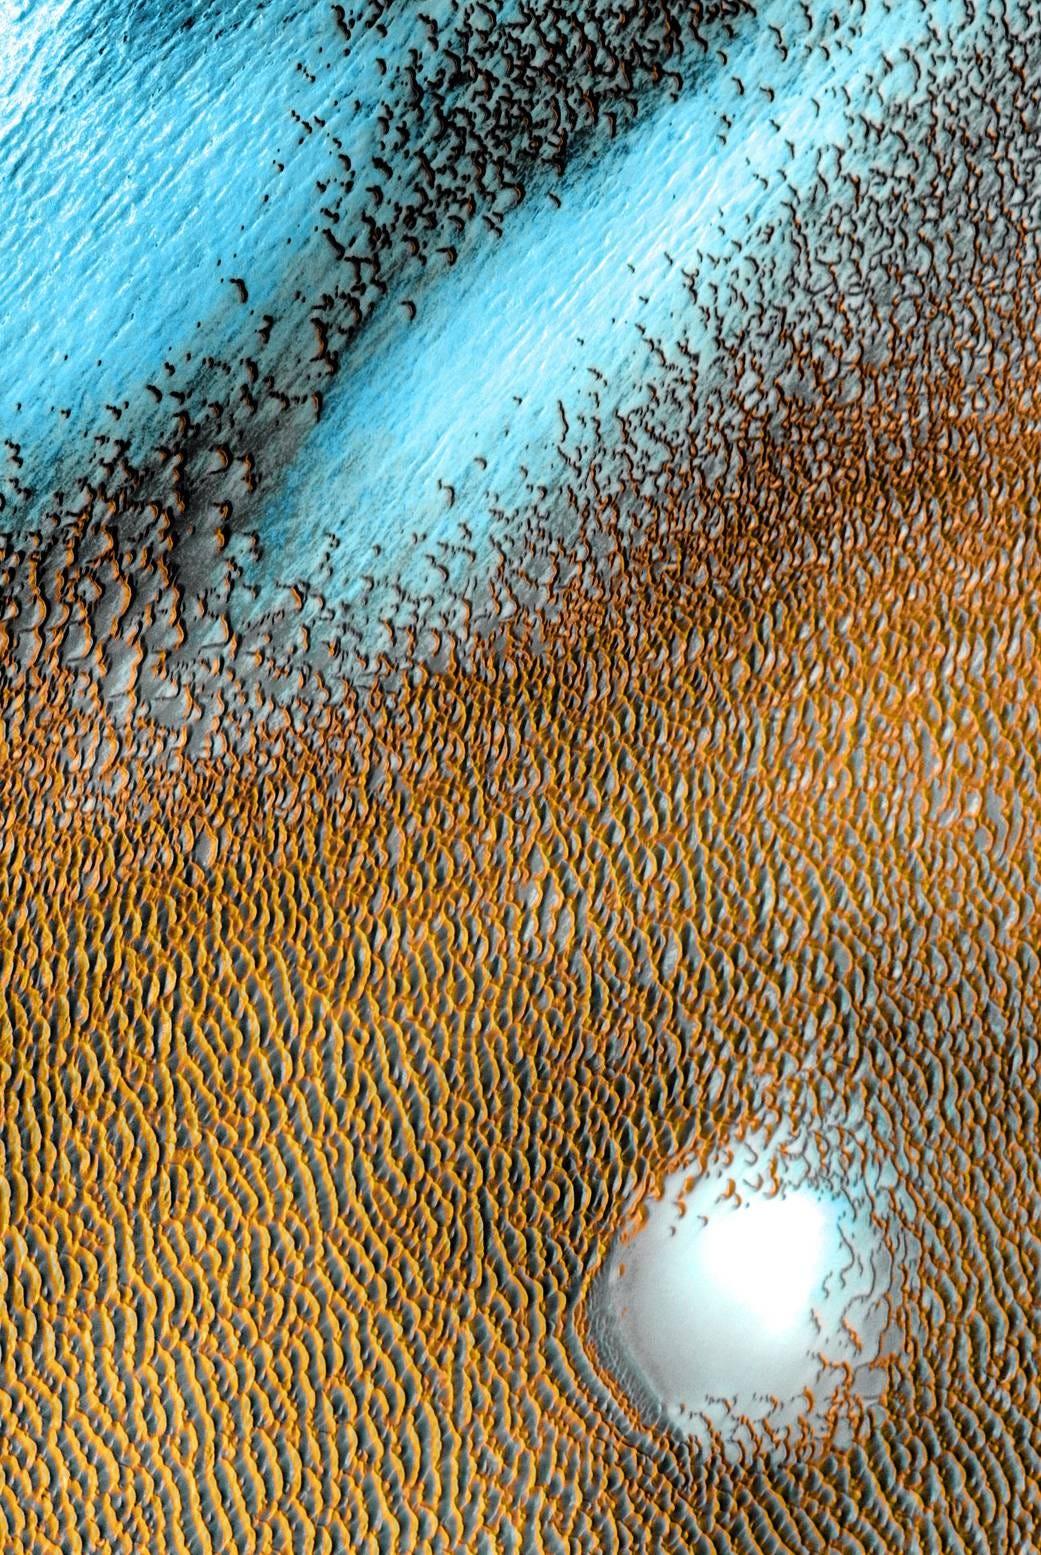 NASA shares breathtaking image of a wind-sculpted sea of blue dunes on